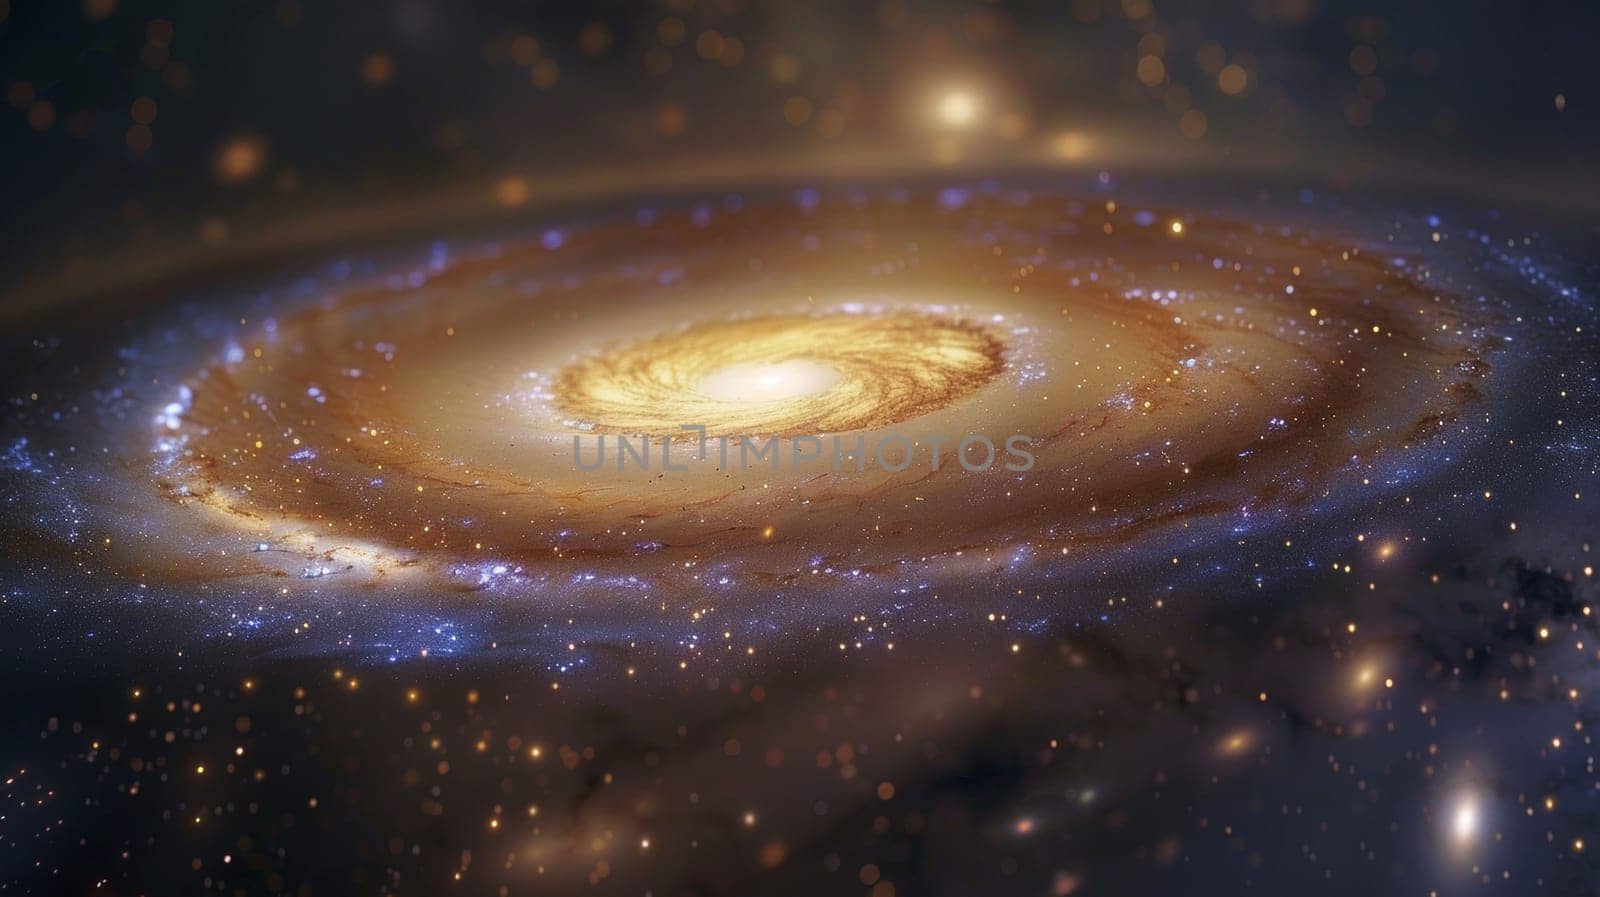 A spiral galaxy with a bright yellow center, AI by starush